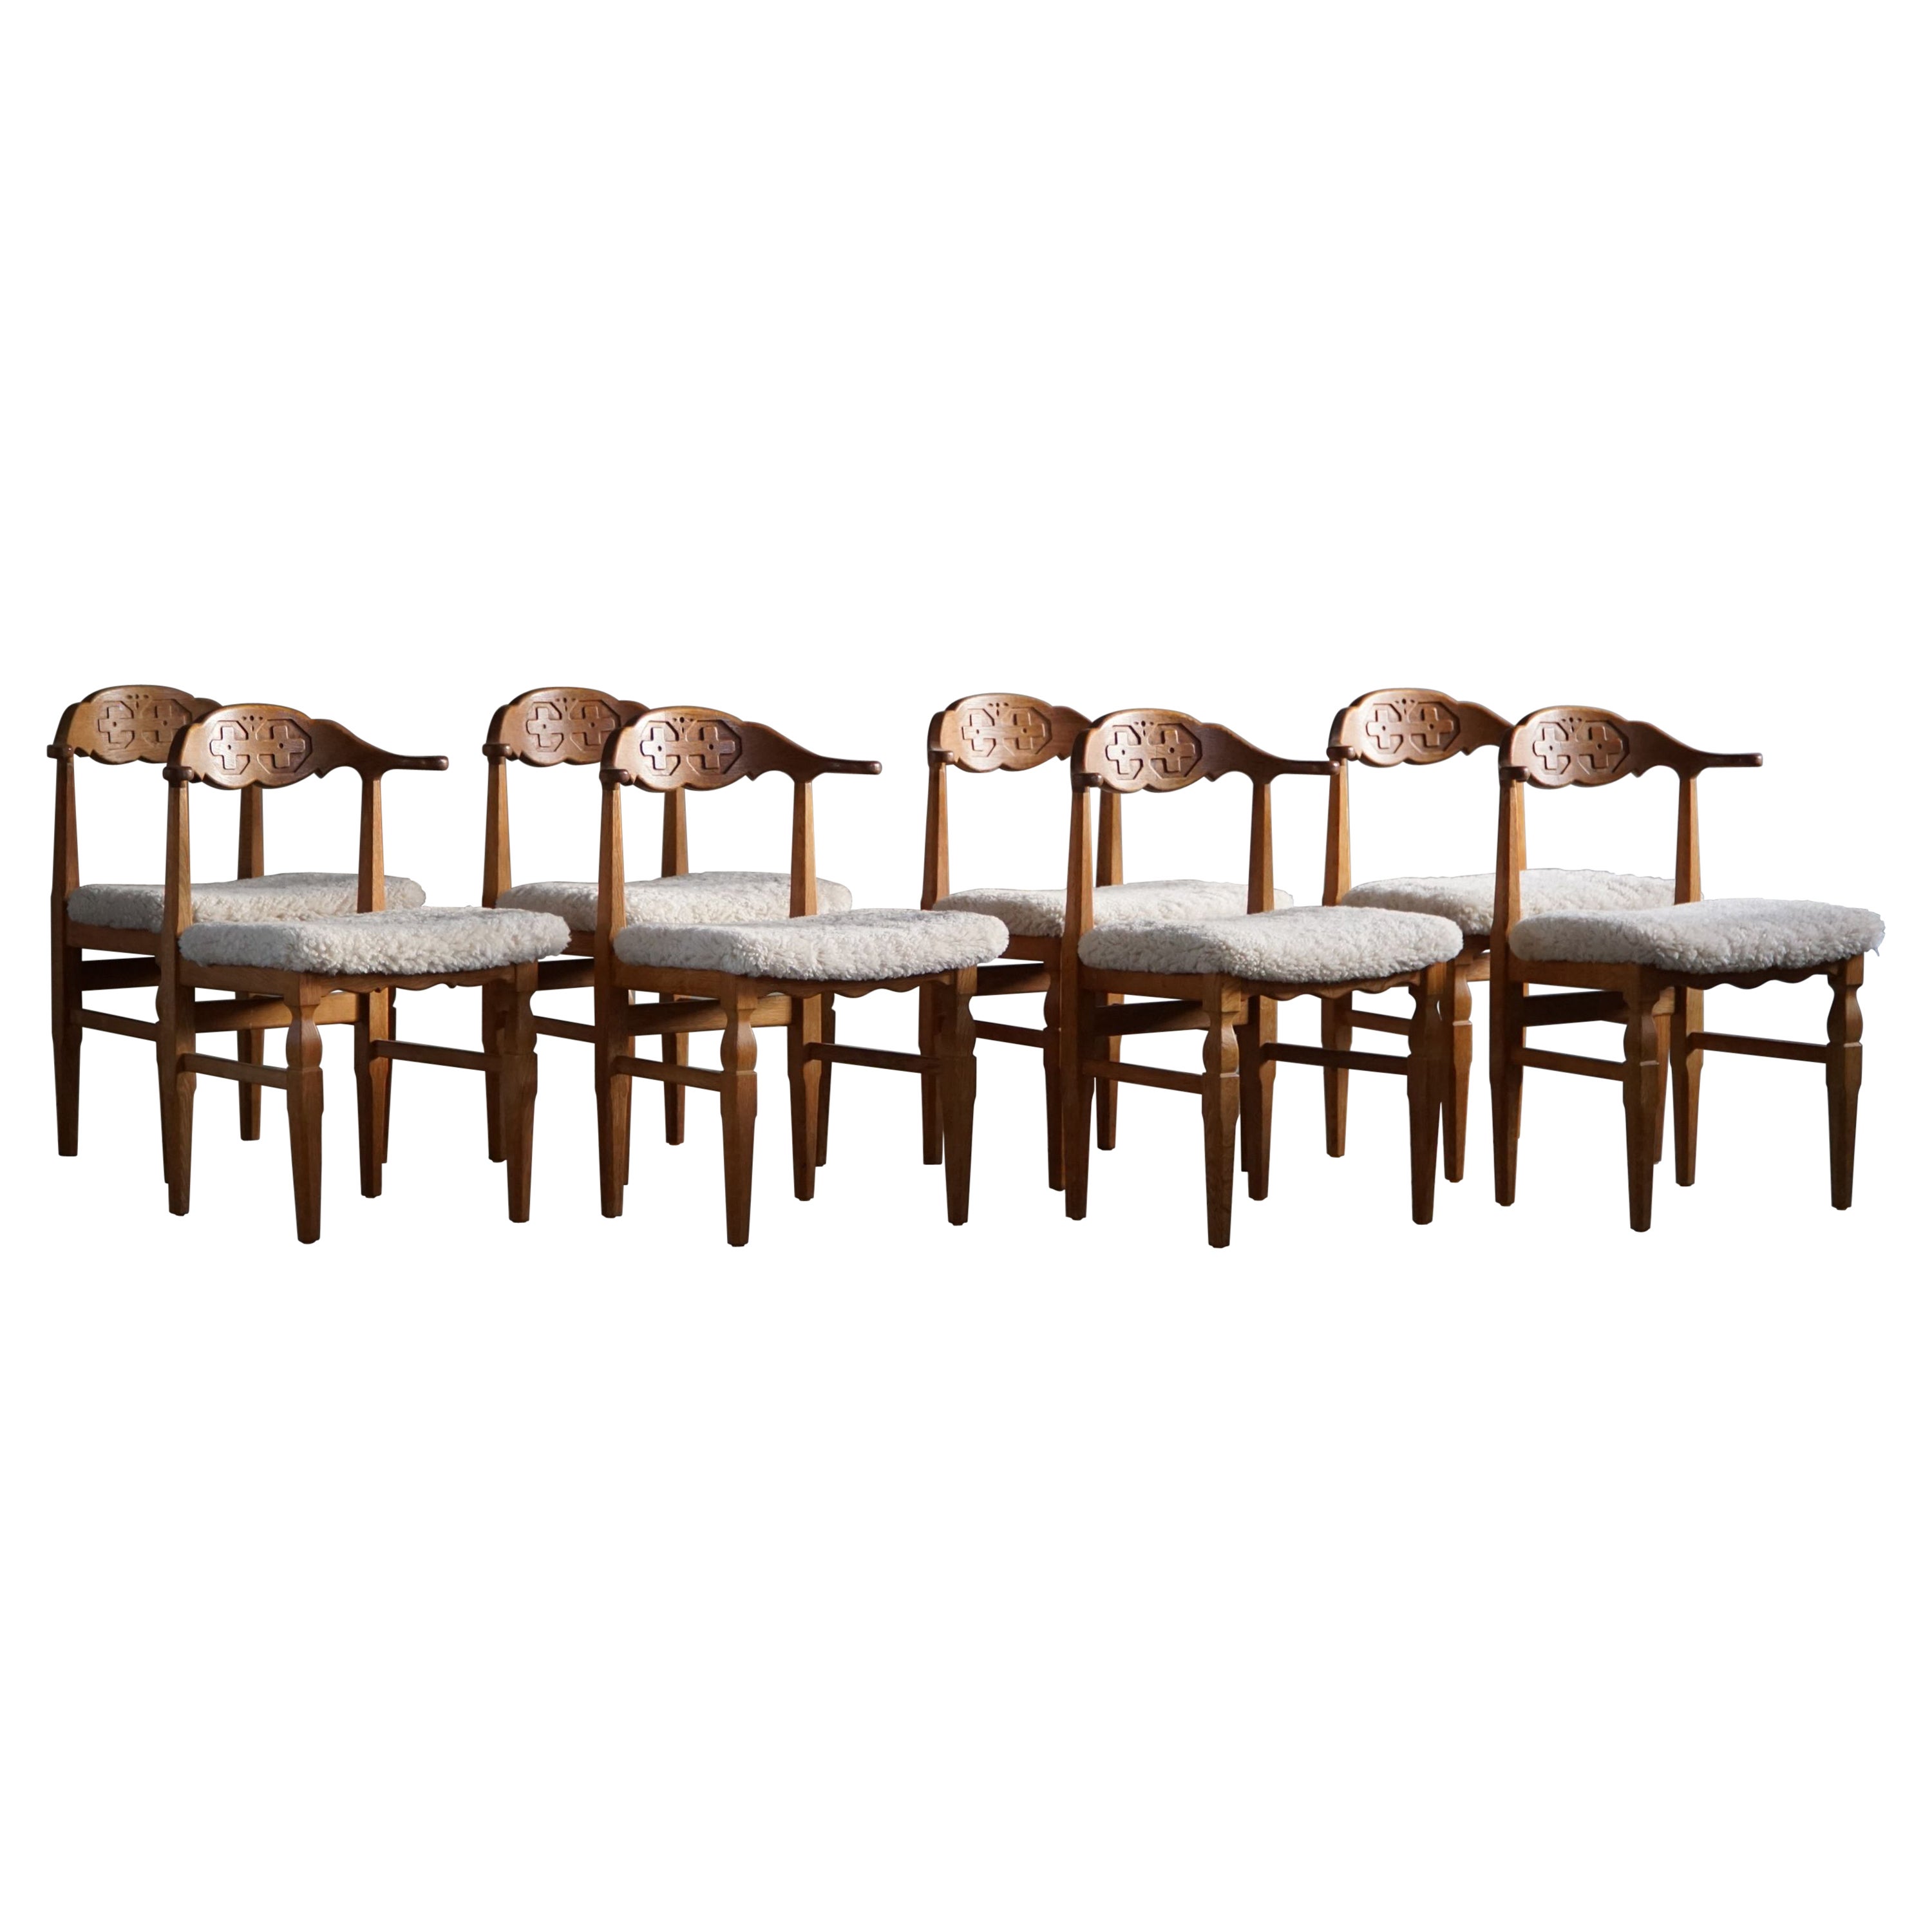 Henning Kjærnulf, Set of 8 Dining Chairs, Reupholstered in Lambswool, 1960s